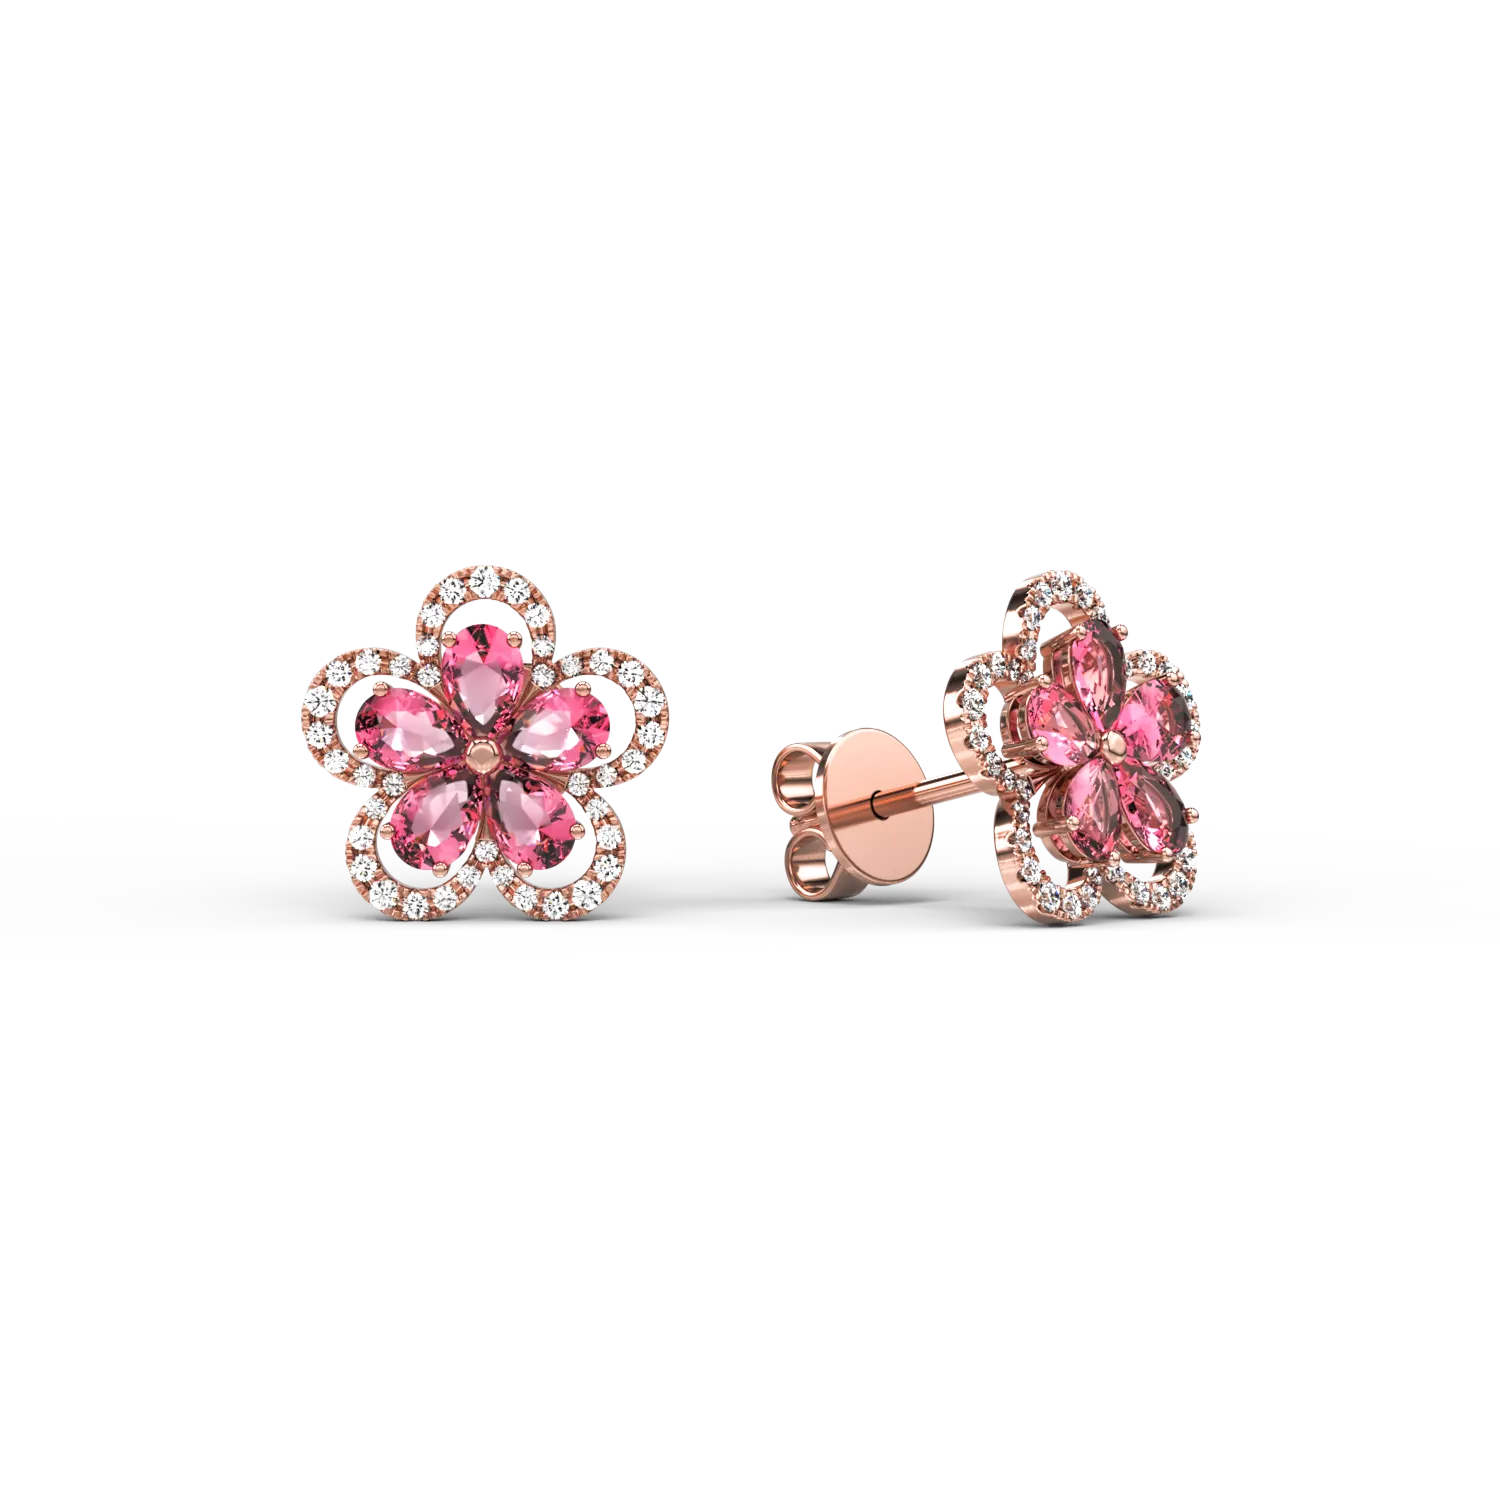 18K rose gold flower earrings with pink tourmalines of 2.1ct and diamonds of 0.29ct